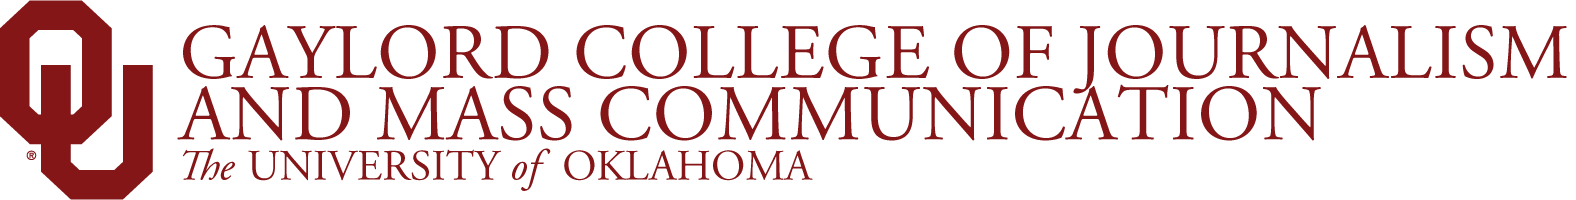 Gaylord College of Journalism and Mass Communication, The University of Oklahoma website wordmark.